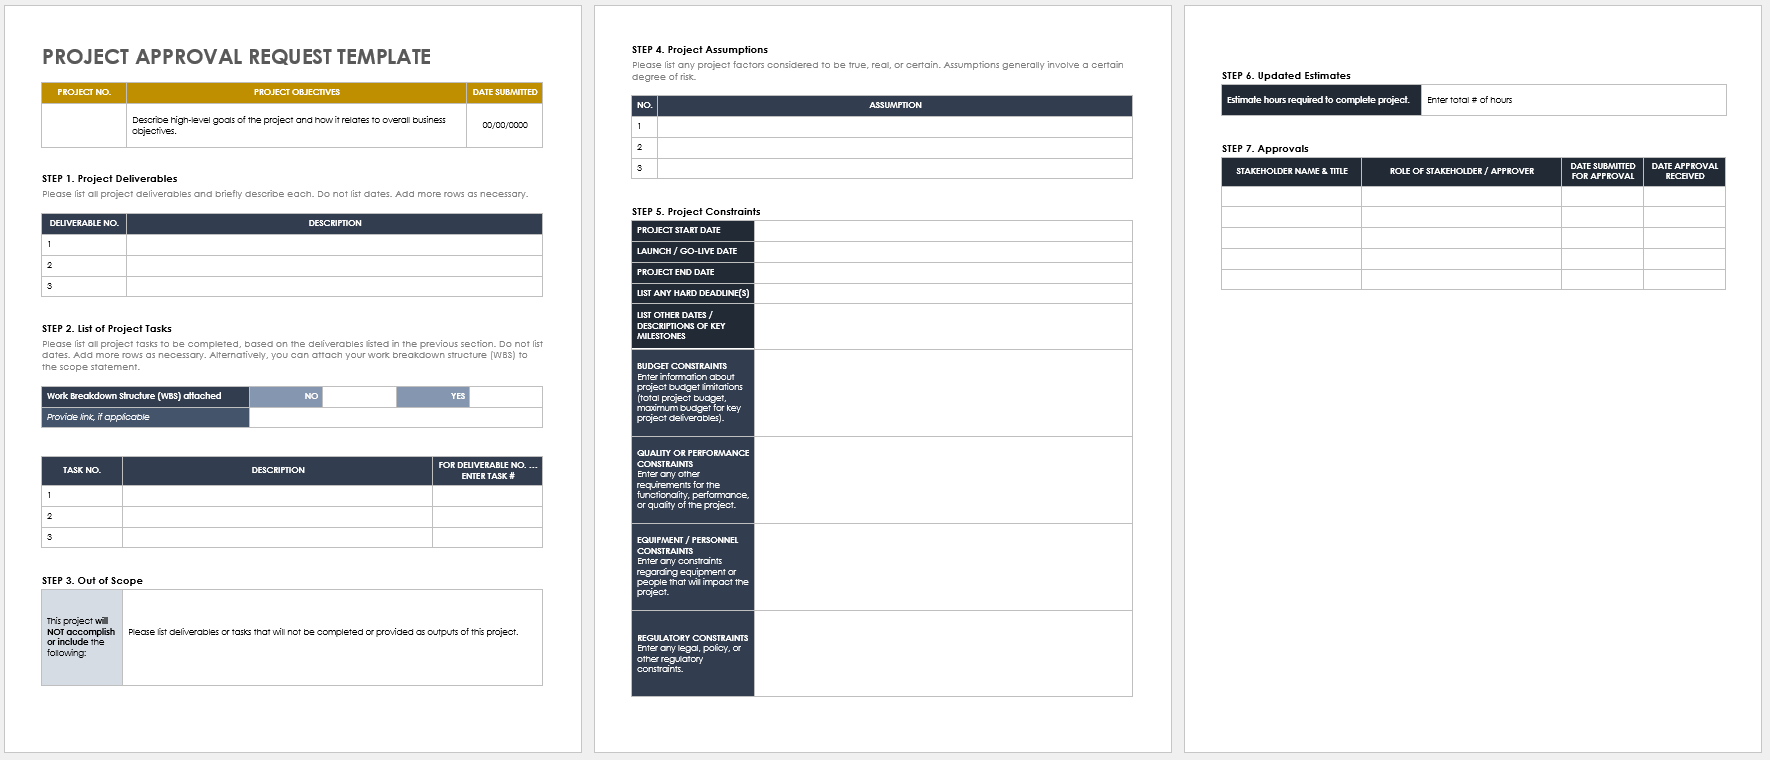 Project Approval Request Template